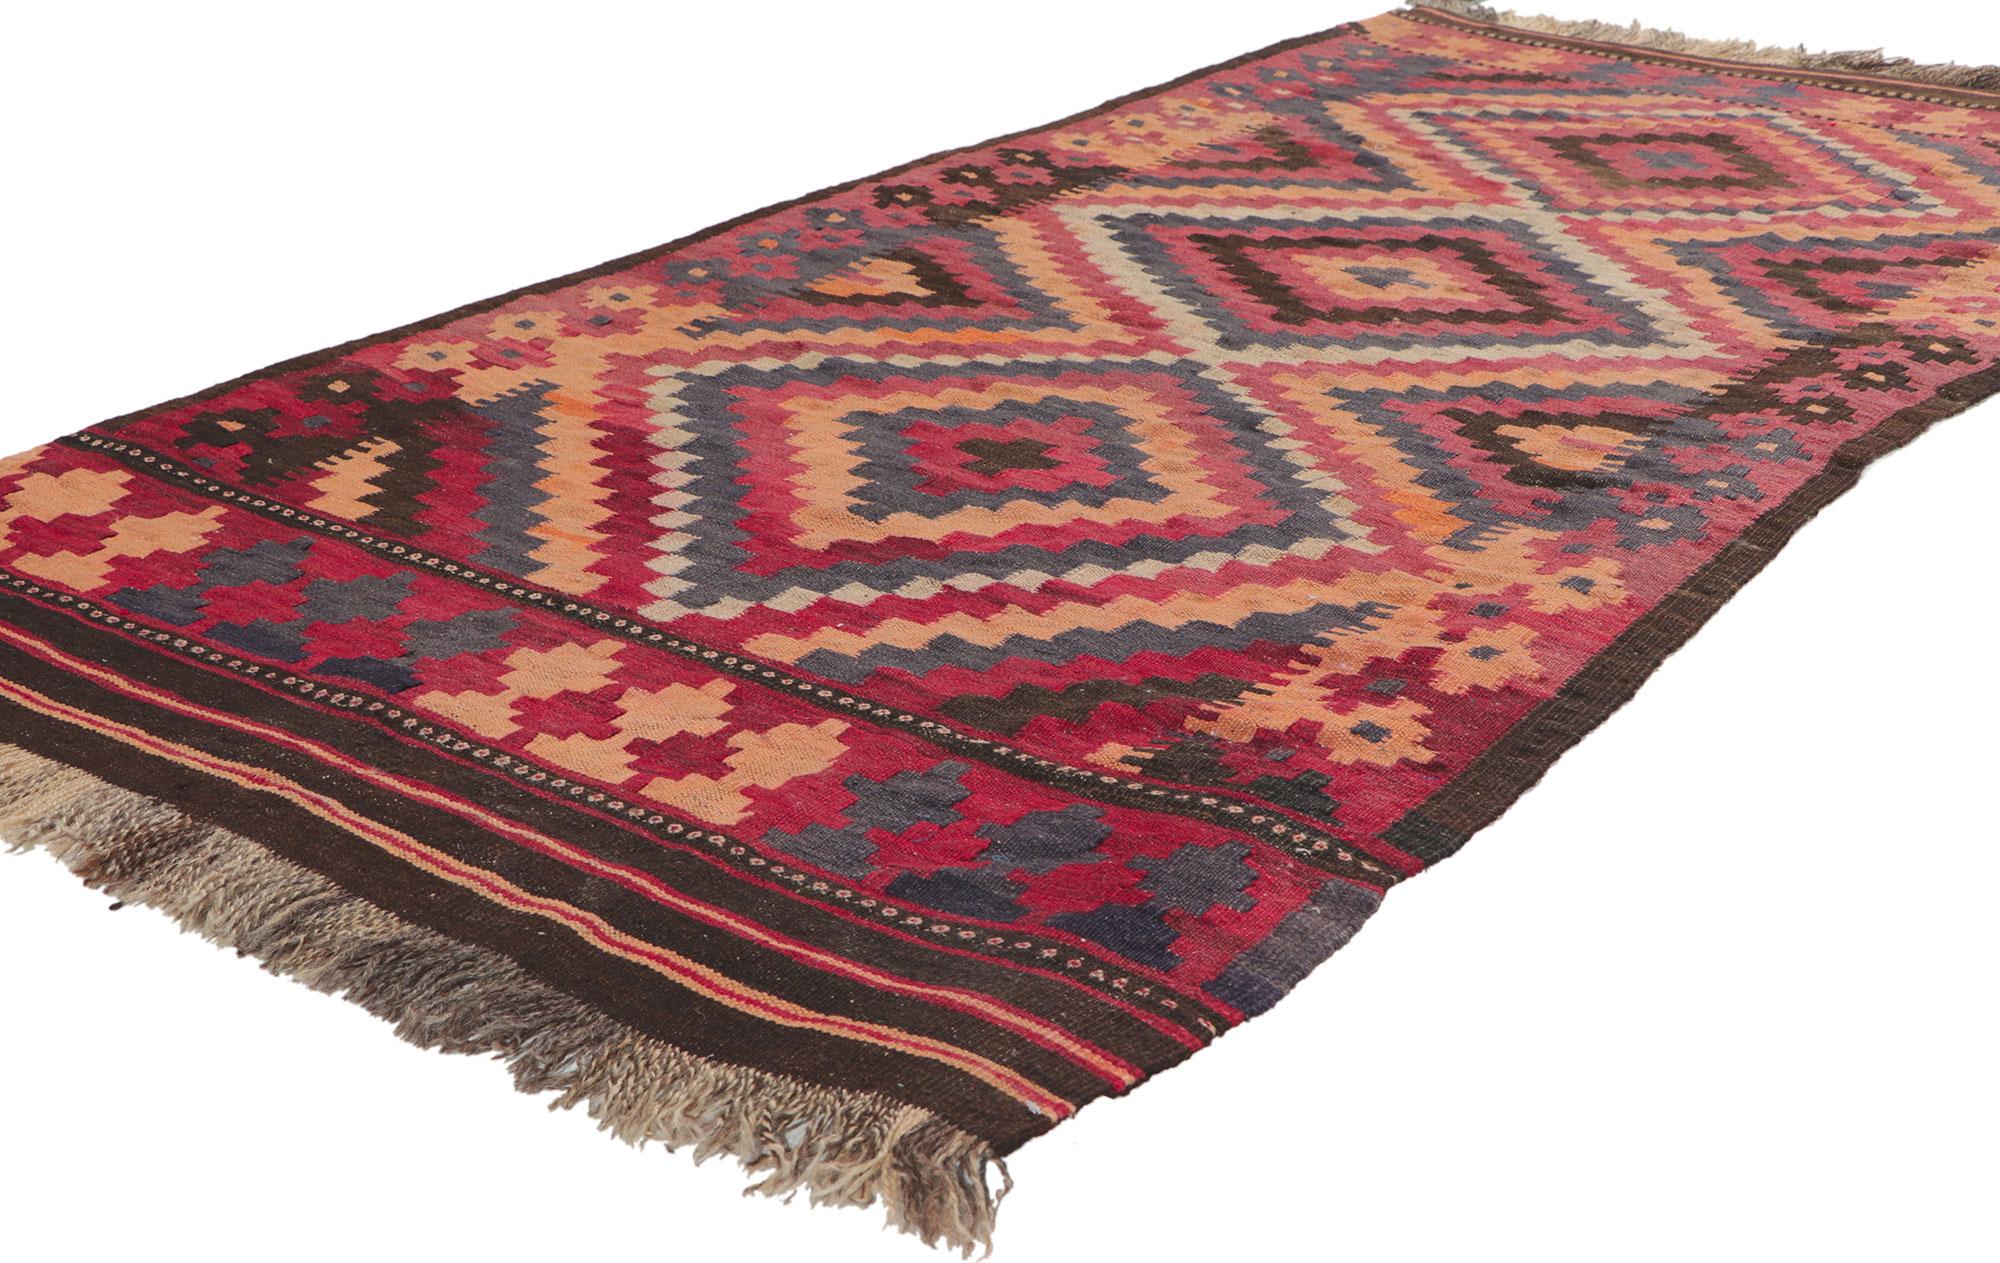 77761 Vintage Afghani Kilim Rug with Tribal Style, 03'02 x 06'04. Full of tiny details and a bold expressive design combined with lively colors and tribal style, this hand-woven wool vintage Afghani Maimana kilim rug is a captivating vision of woven